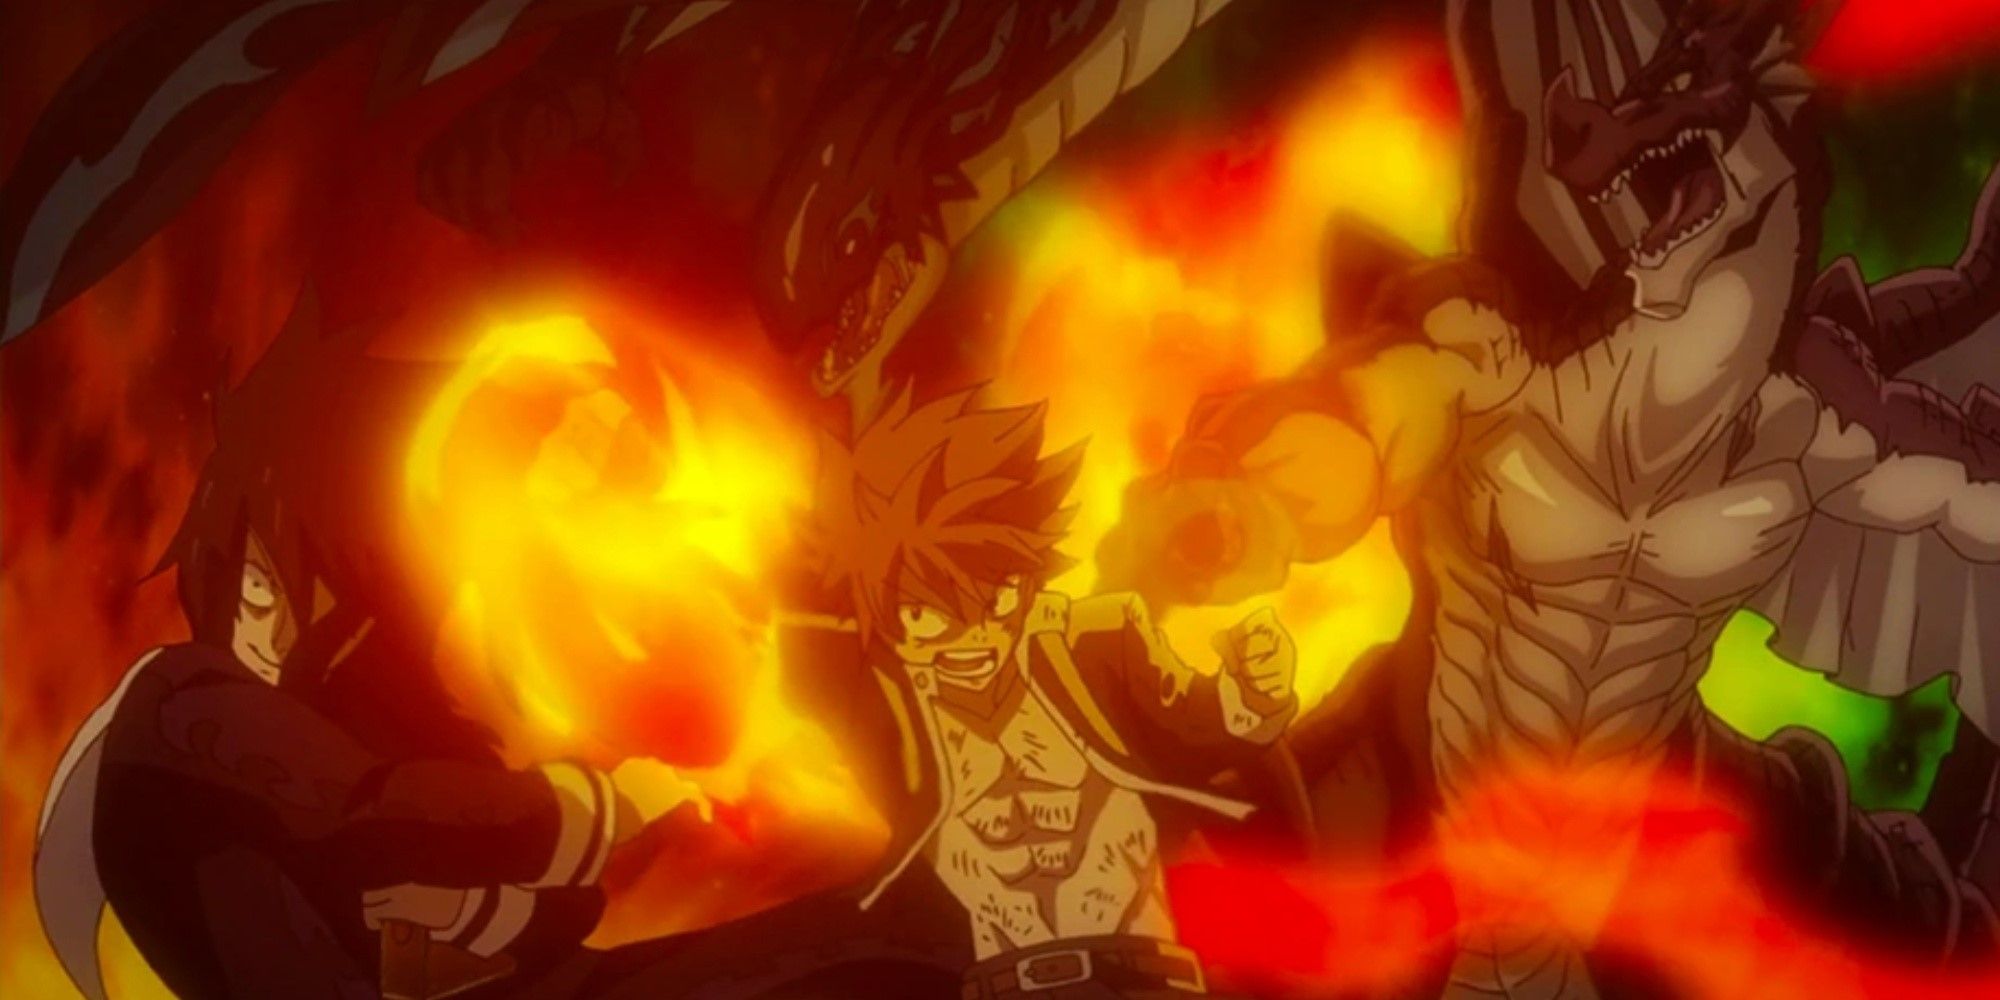 Natsu punching someone with a dragon behind him in Fairy Tail